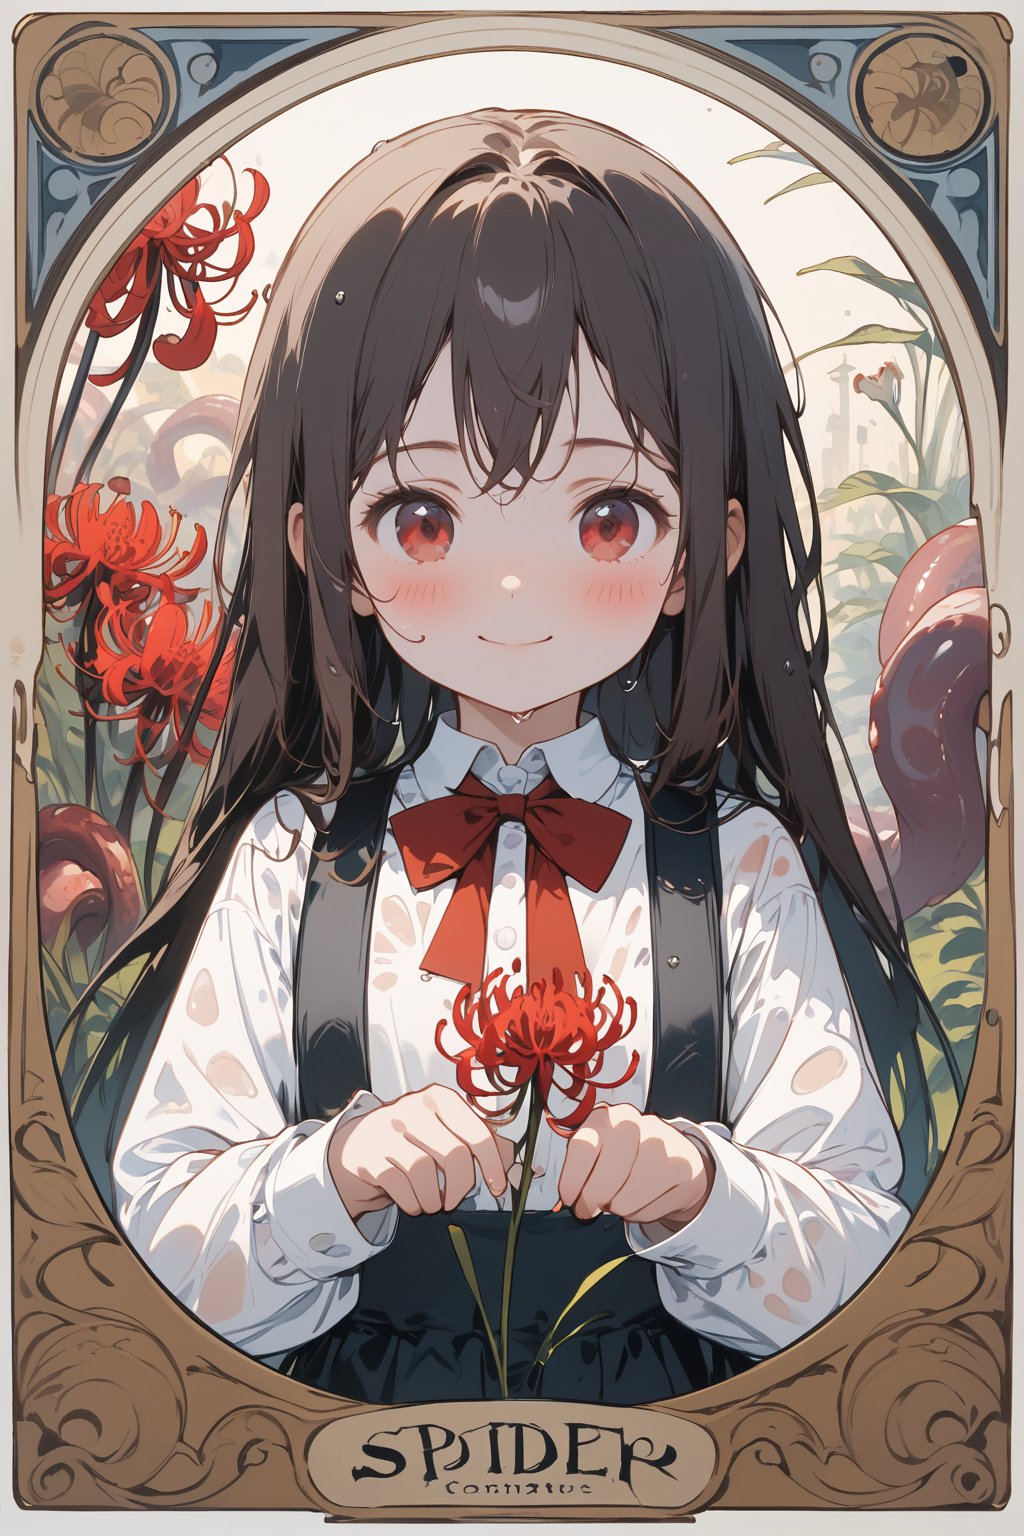 //quality, masterpiece:1.4, detailed:1.4,best quality:1.4,//,1girl,solo,(loli),//, black_hair,long hair,bangs,sidelocks,straight_hair,red_eyes,//,black suspender dress,white shirt,red bow,long_sleeves,black shoes,(wet),wet hair,wet clothes, (tentacles),hair_tentacles,lots of tentacles,surrounding by tentacles,//,closed_mouth,blush,smile,//,tentacles around body,(holding flower,spider_lily),//,symmetry,daybreak,perfect lighting,spider_lily_(flower),(garden),horror,eldritch_abomination,close_up portrait,straight-on,illustration,art nouveau